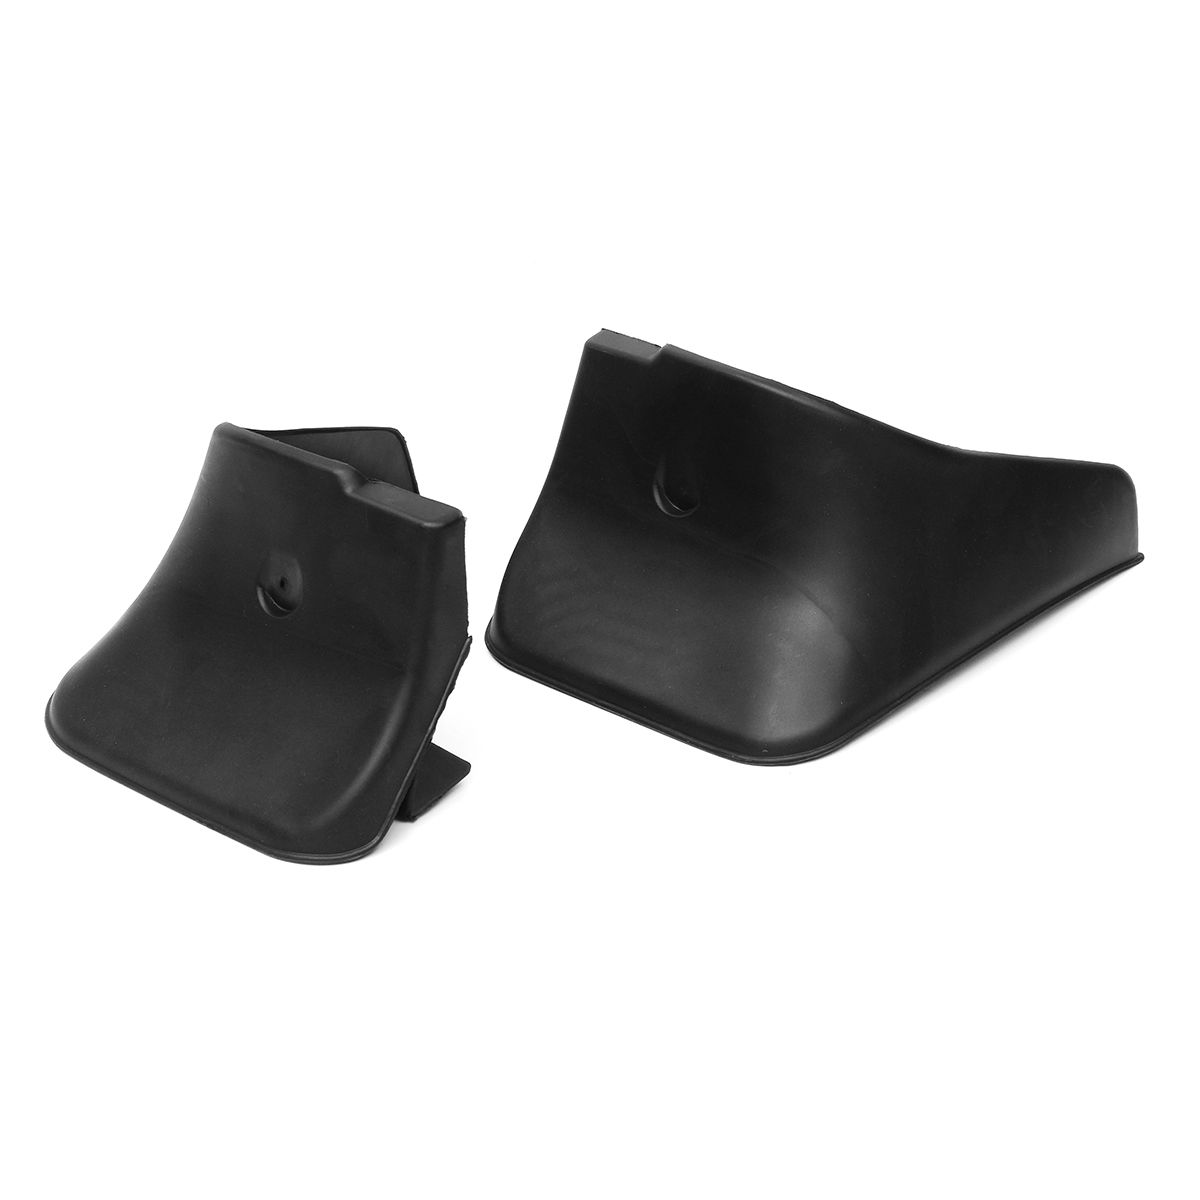 4Pcs-Front-And-Rear-Mud-Flaps-Car-Mudguards-For-Toyota-Corolla-Altis-E140-2007-2013-1389173